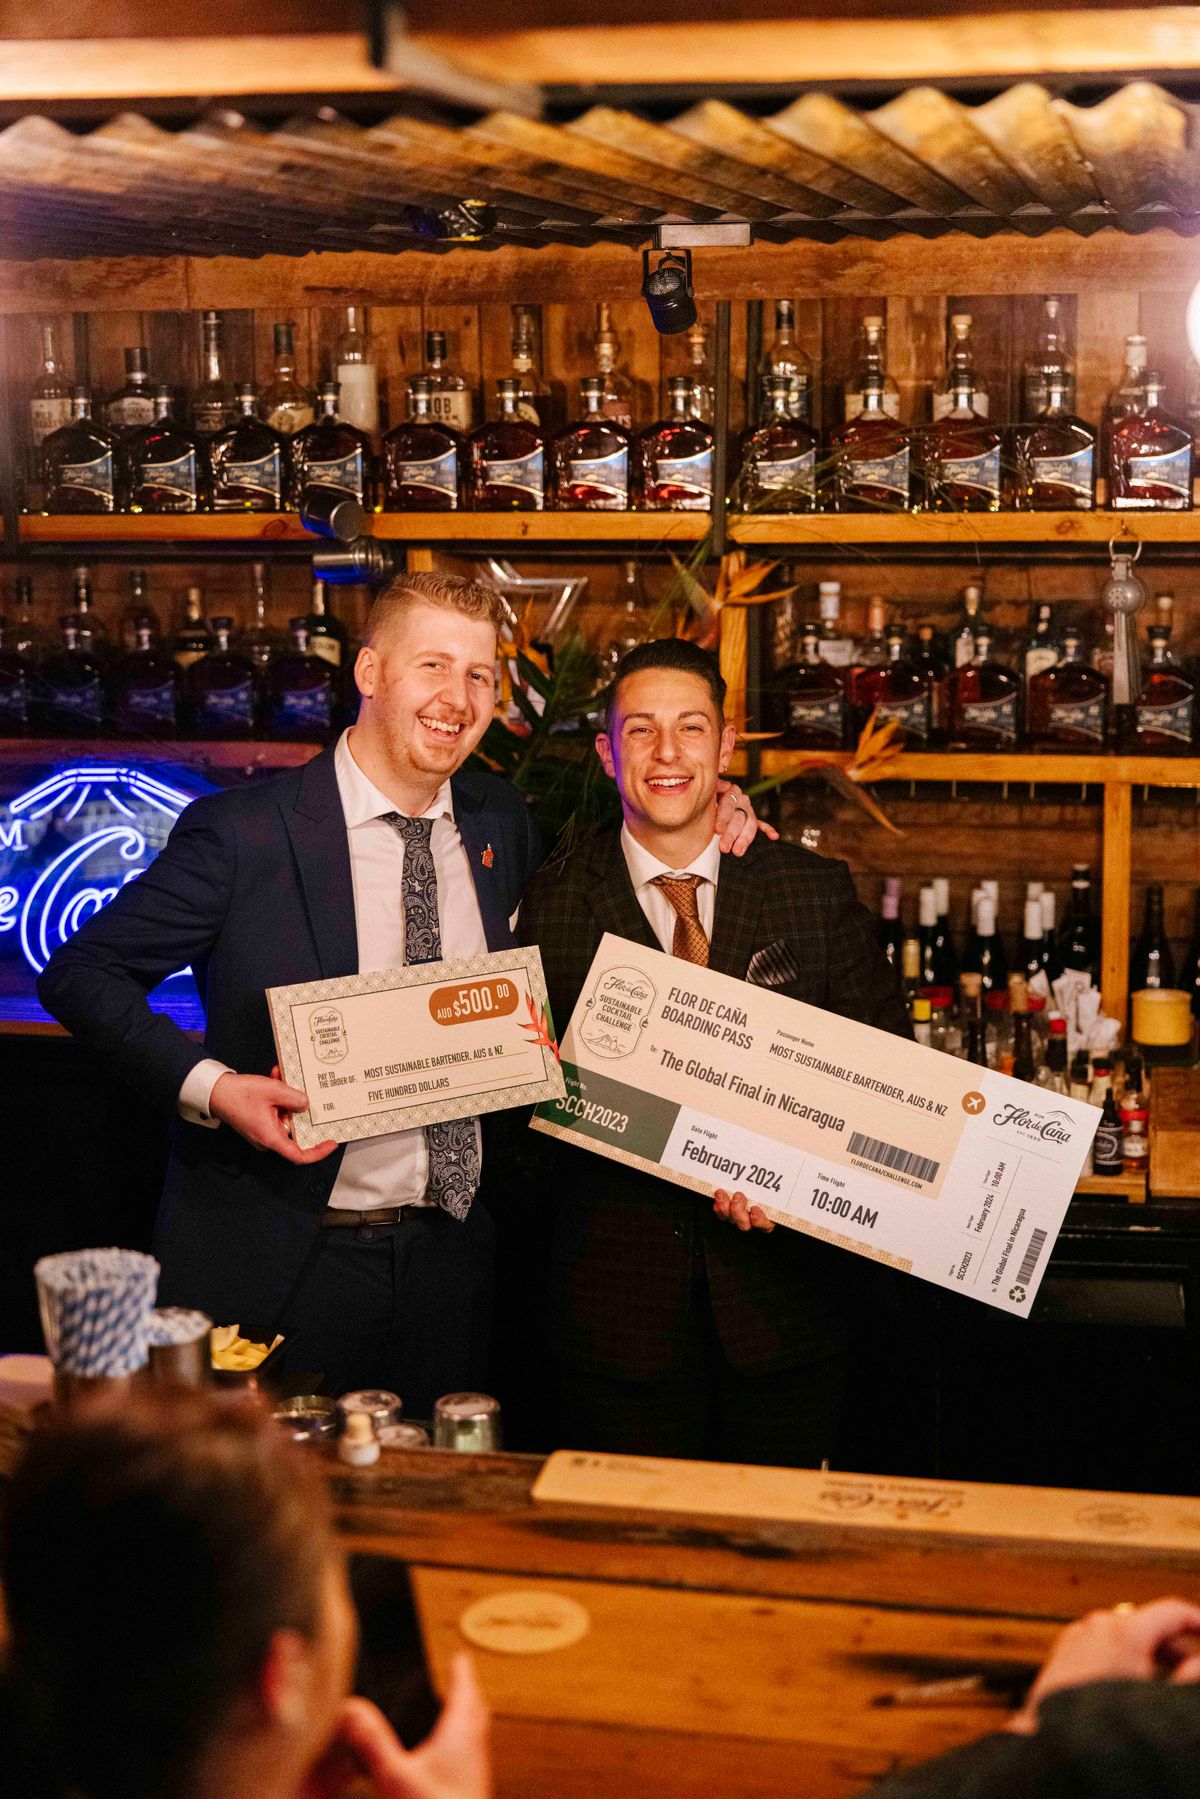 How it was won: Andrea Marseglia went all in on local to win the Flor de Caña Sustainable Cocktail Challenge